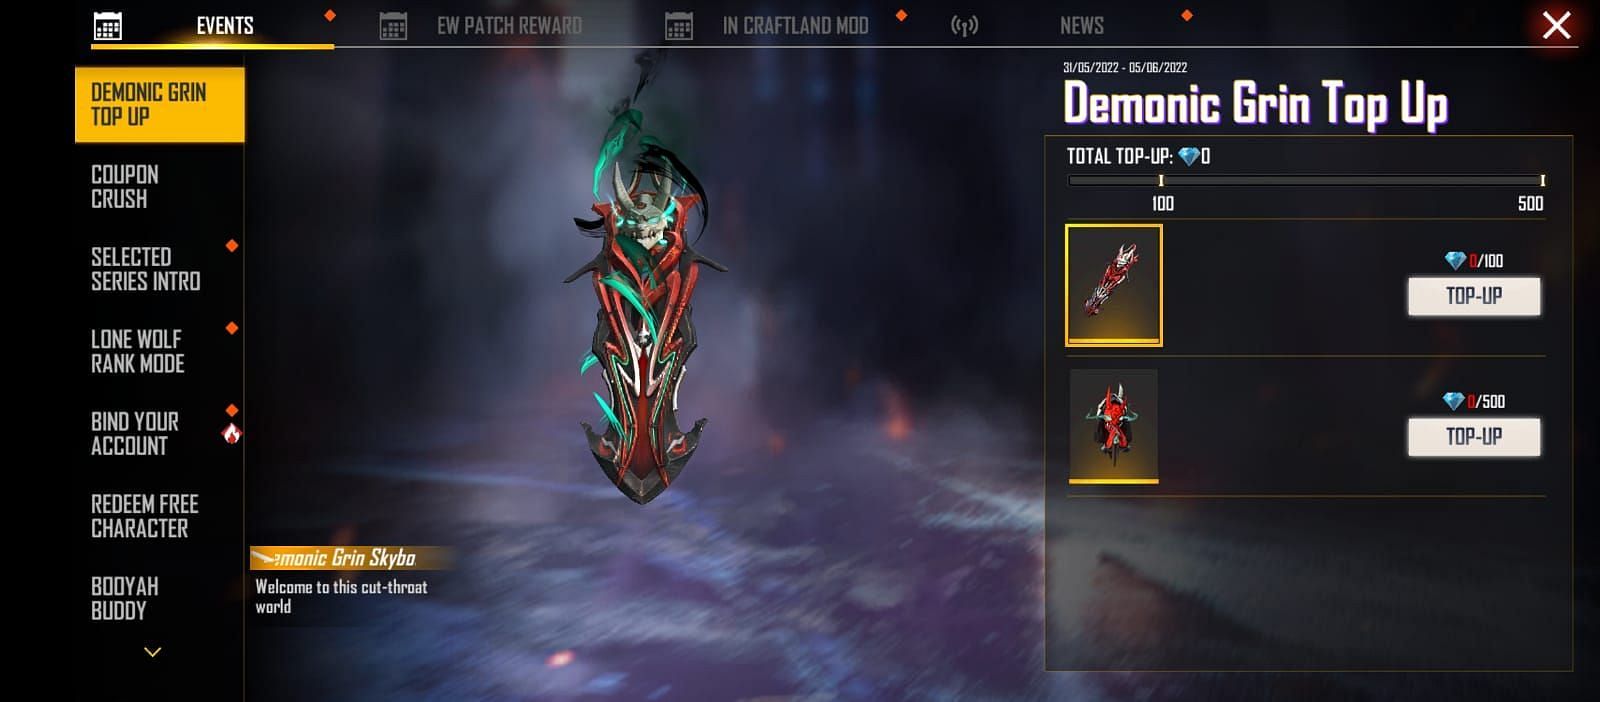 The Demonic Grin Skyboard can be claimed by topping up 100 diamonds (Image via Garena)